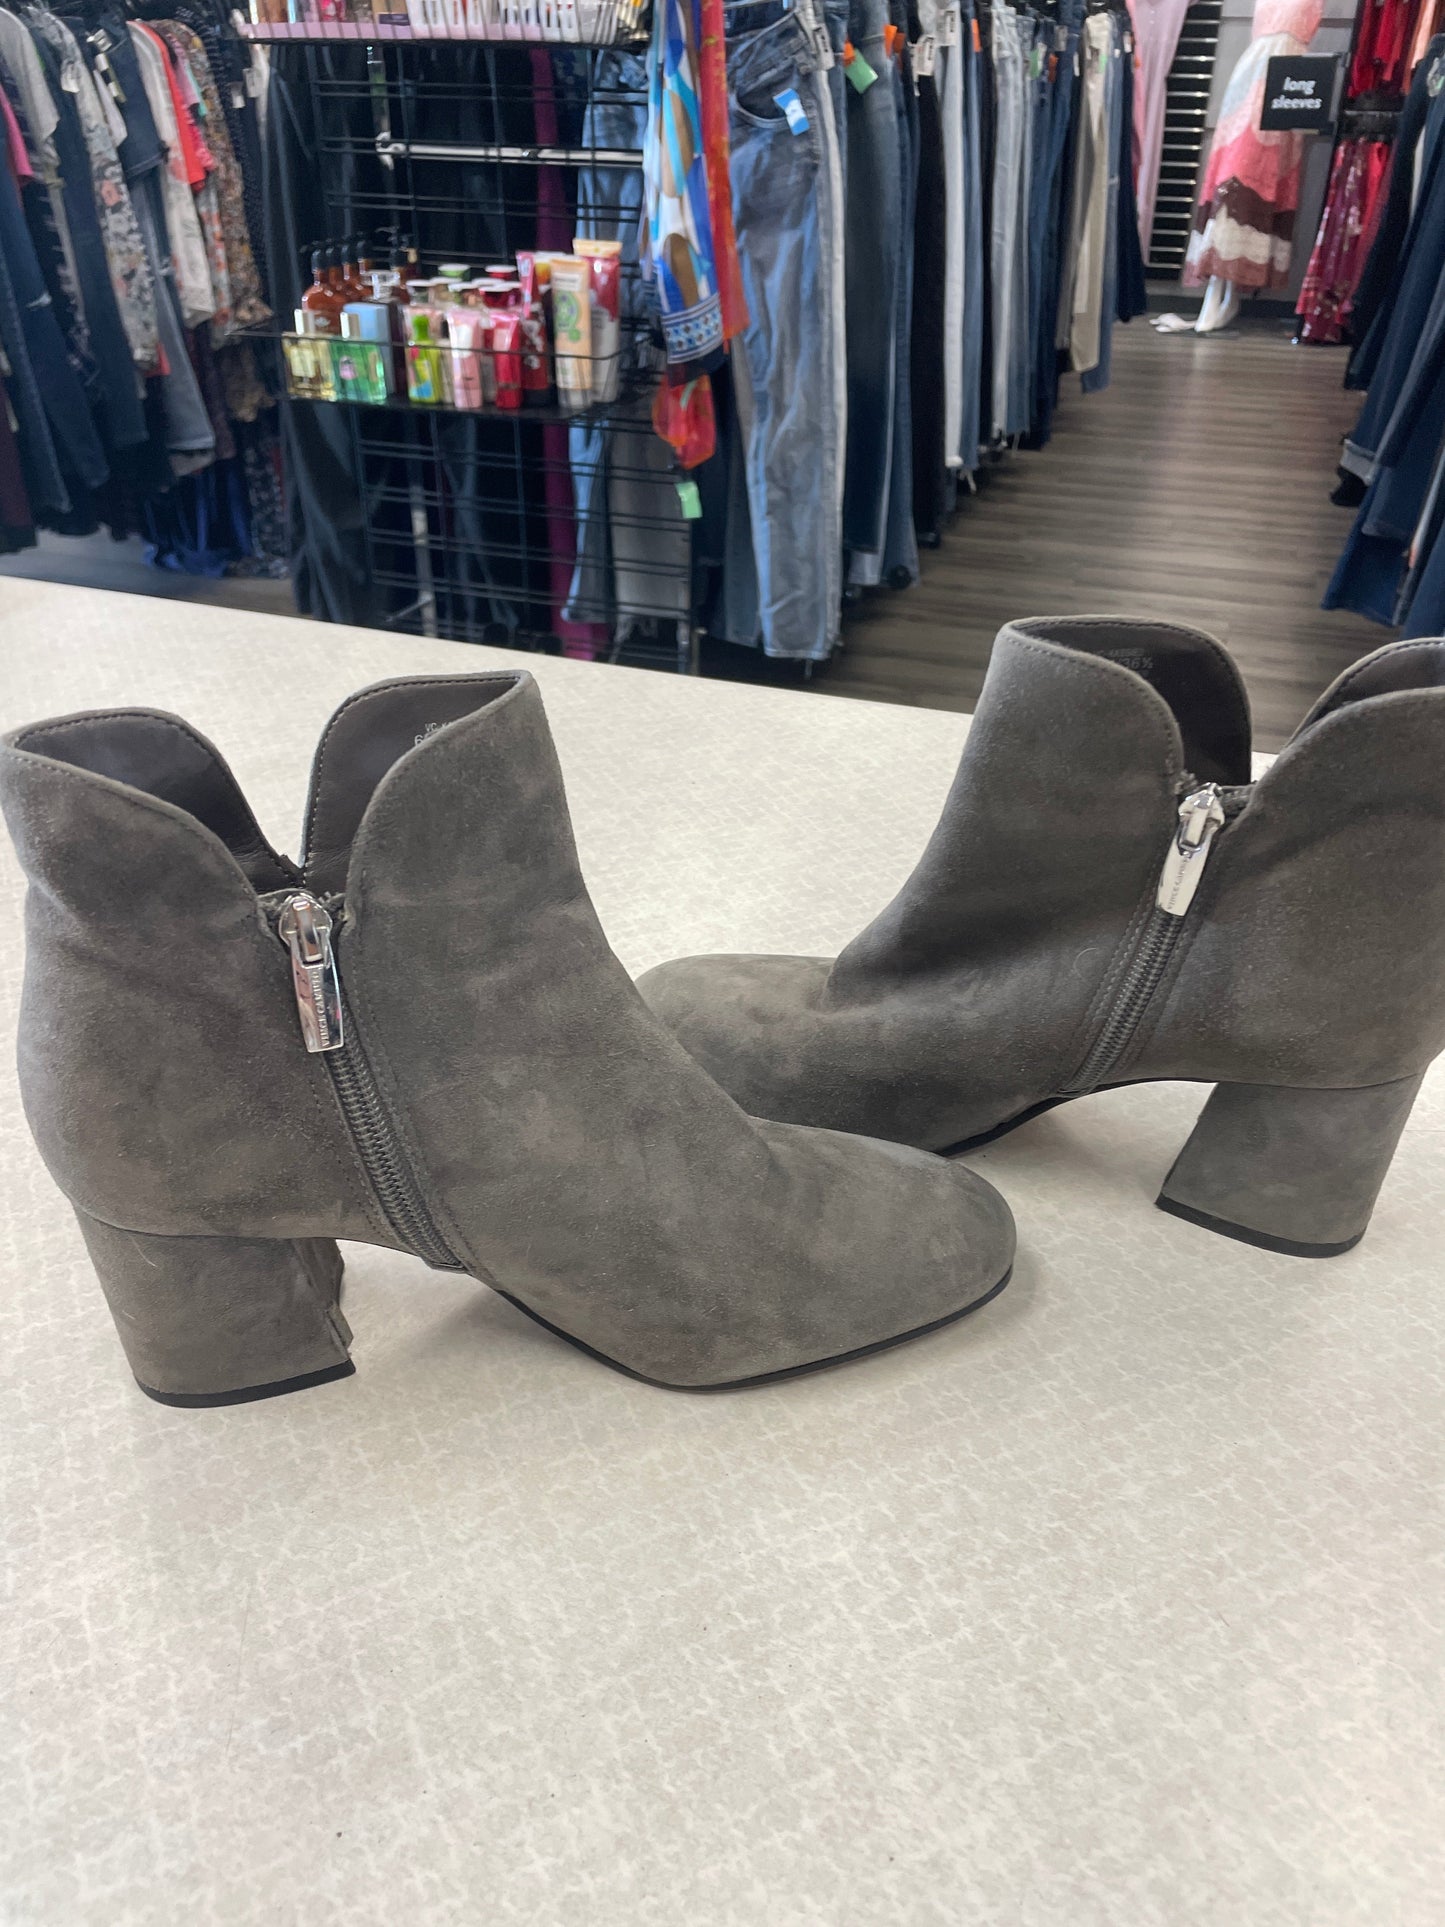 Grey Boots Ankle Heels Vince Camuto, Size 6.5